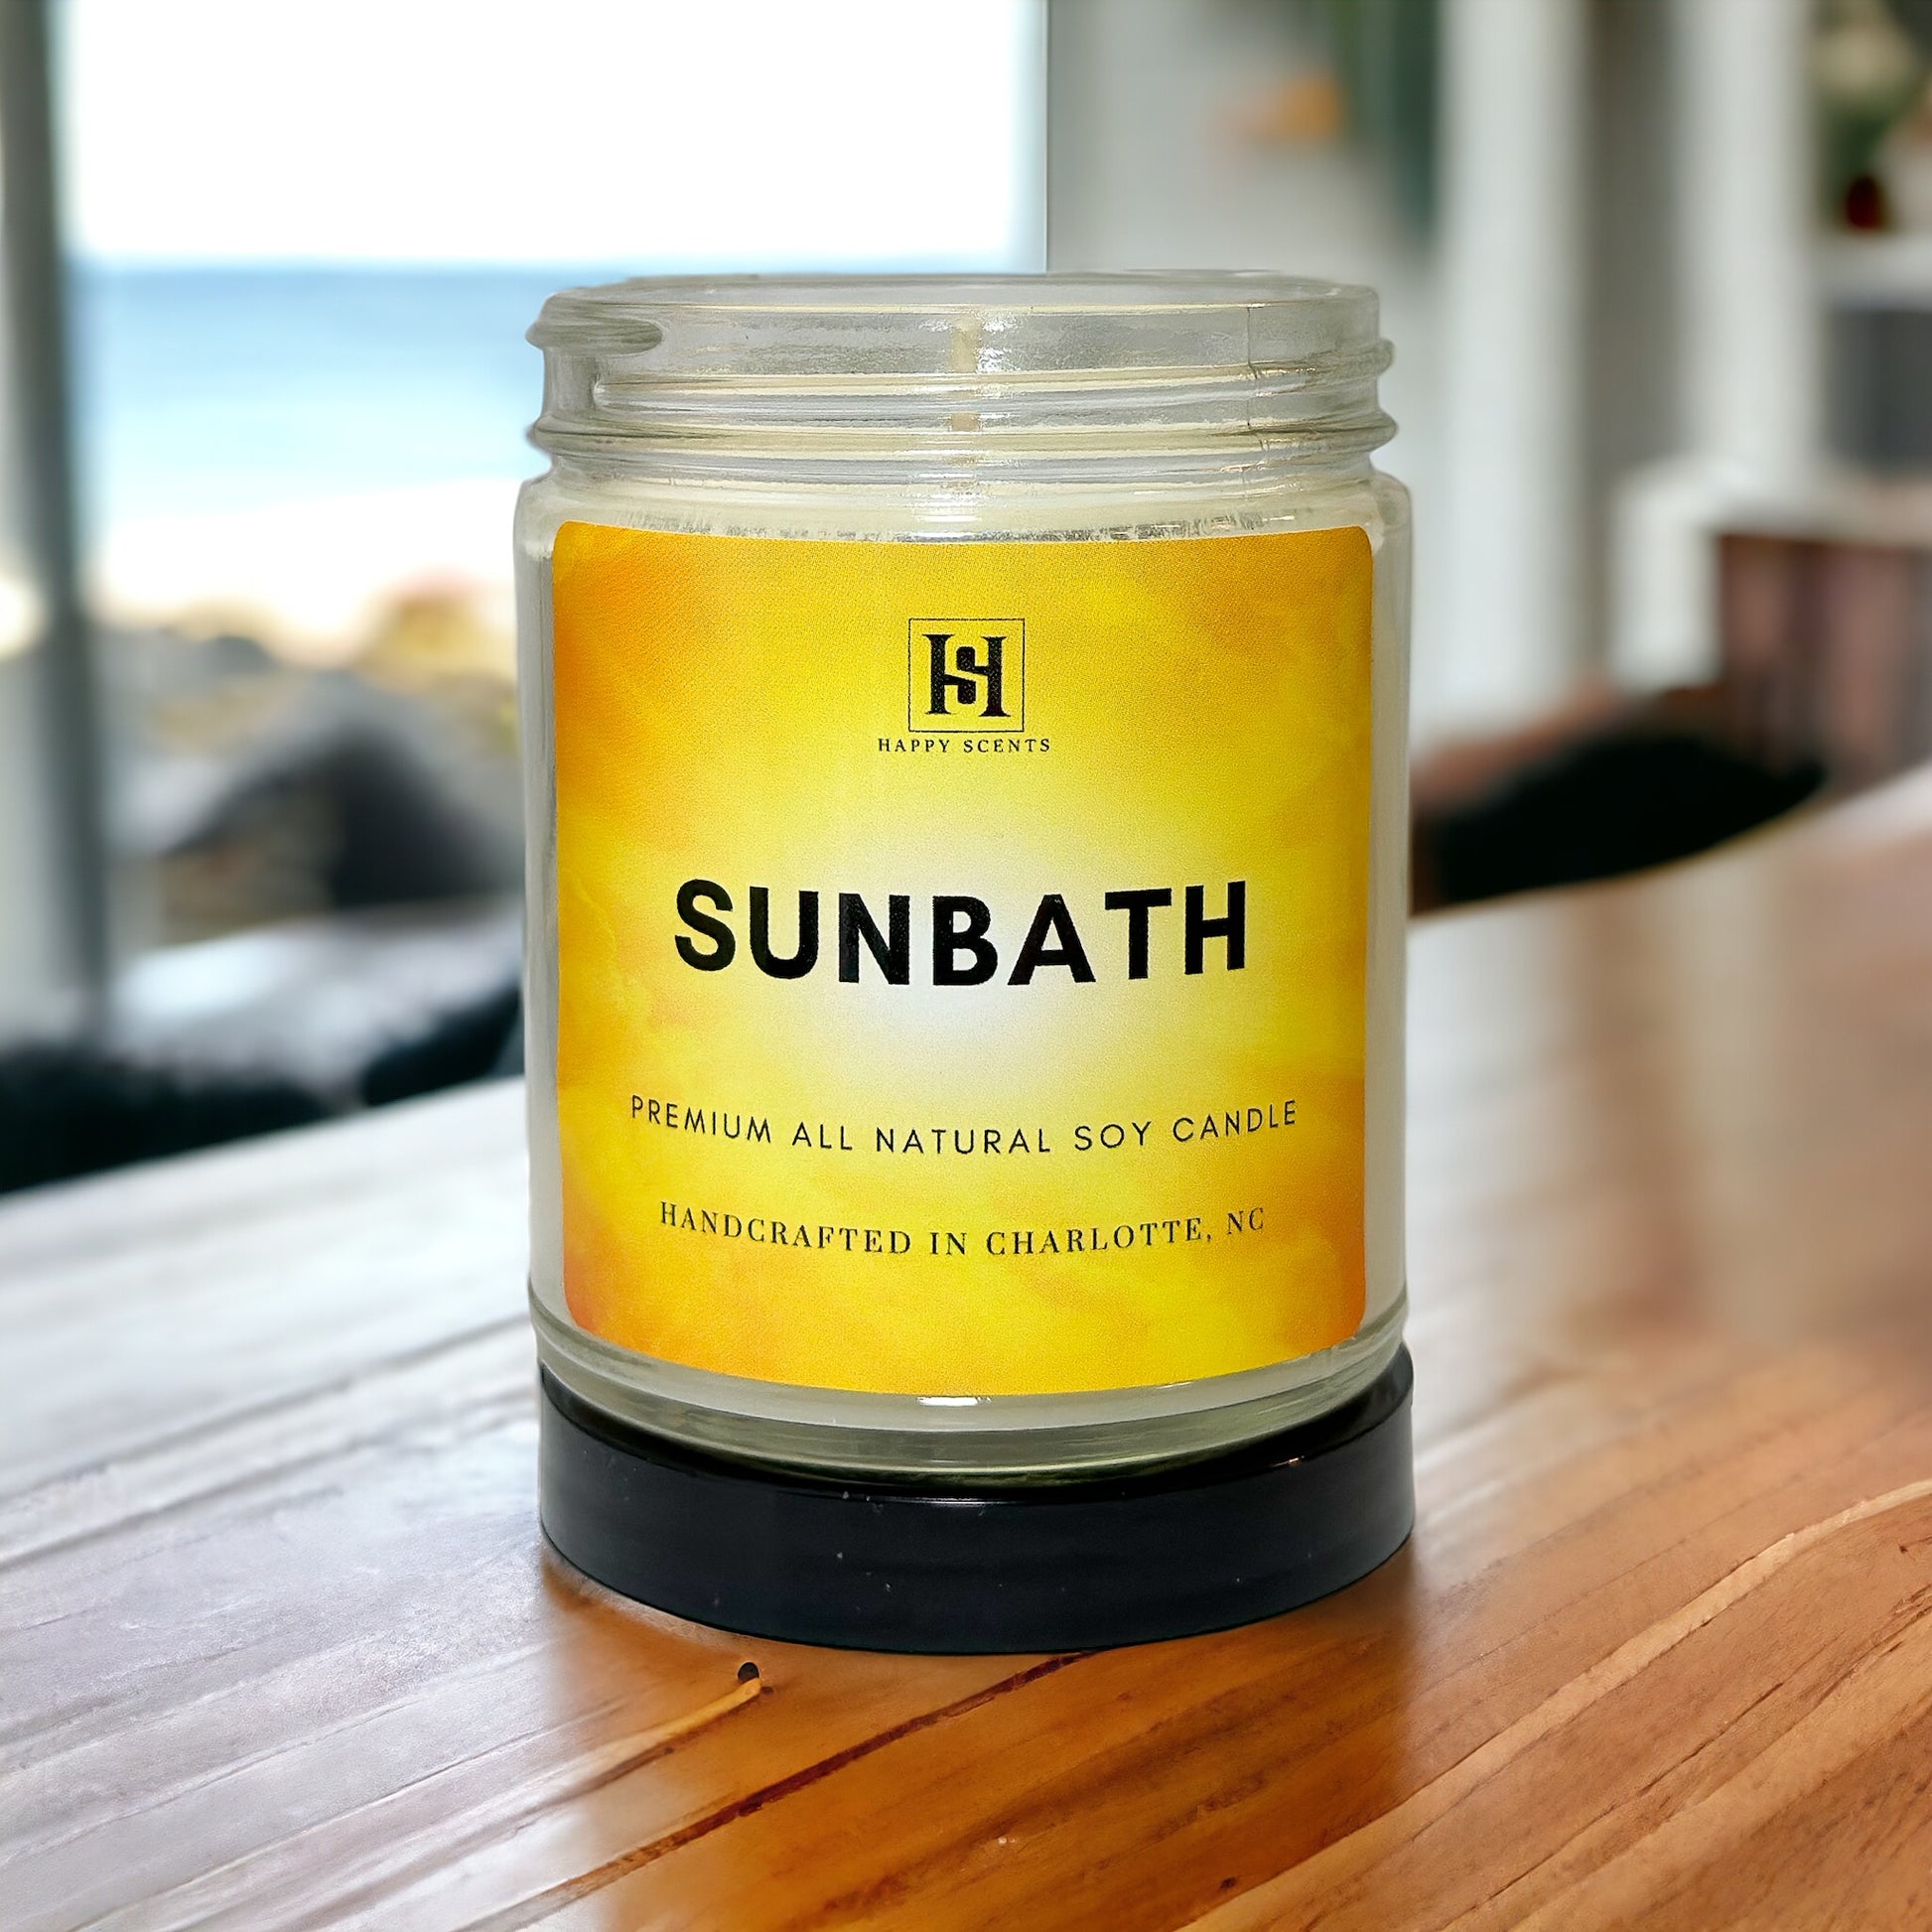 Sunbath Soy Candle. Spring/Summer candle